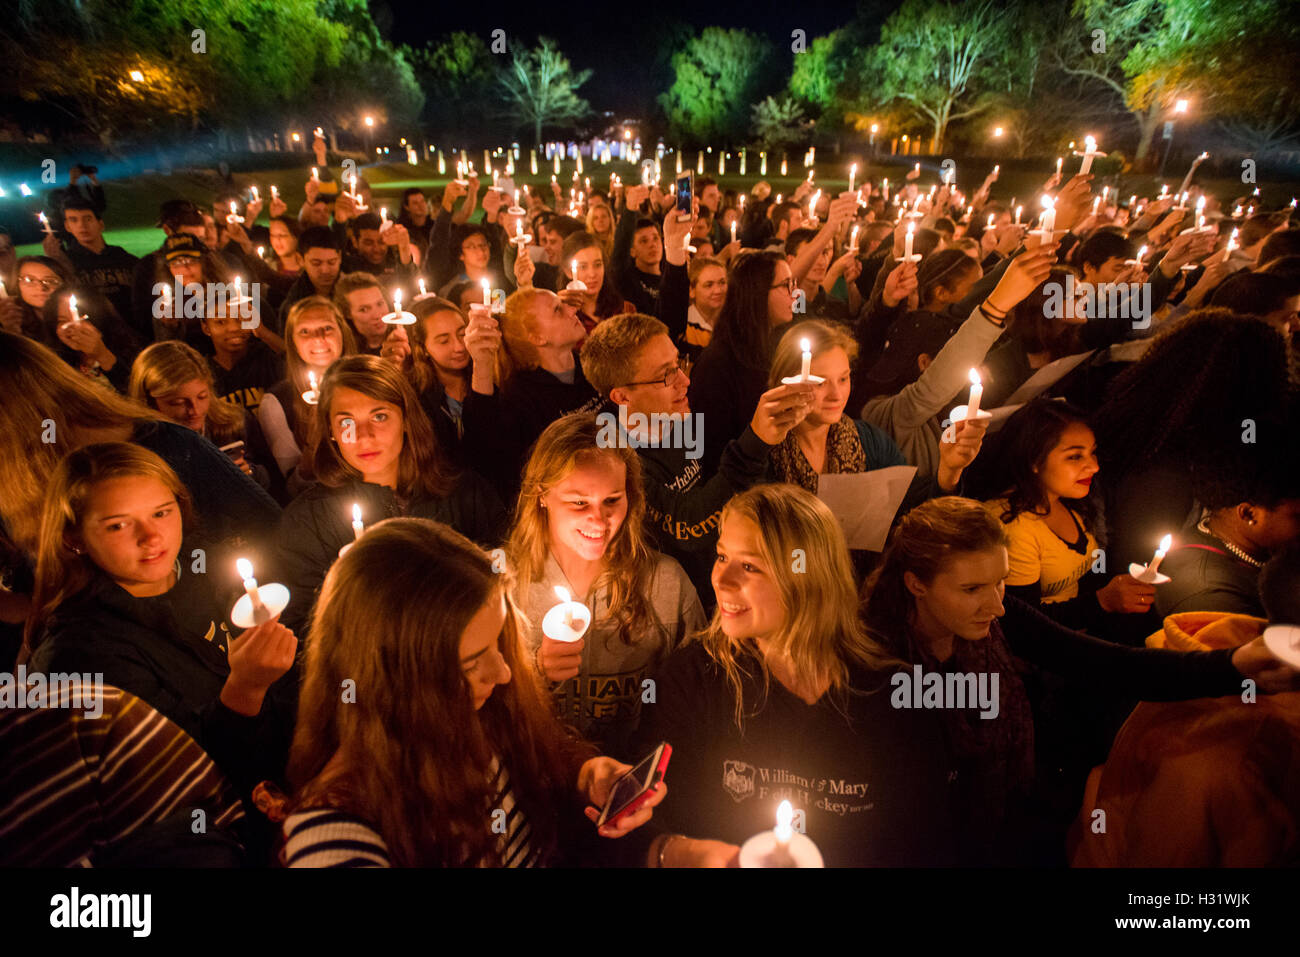 Candlelight Ceremony at the College of William and Mary in Williamsburg, Virginia. Stock Photo